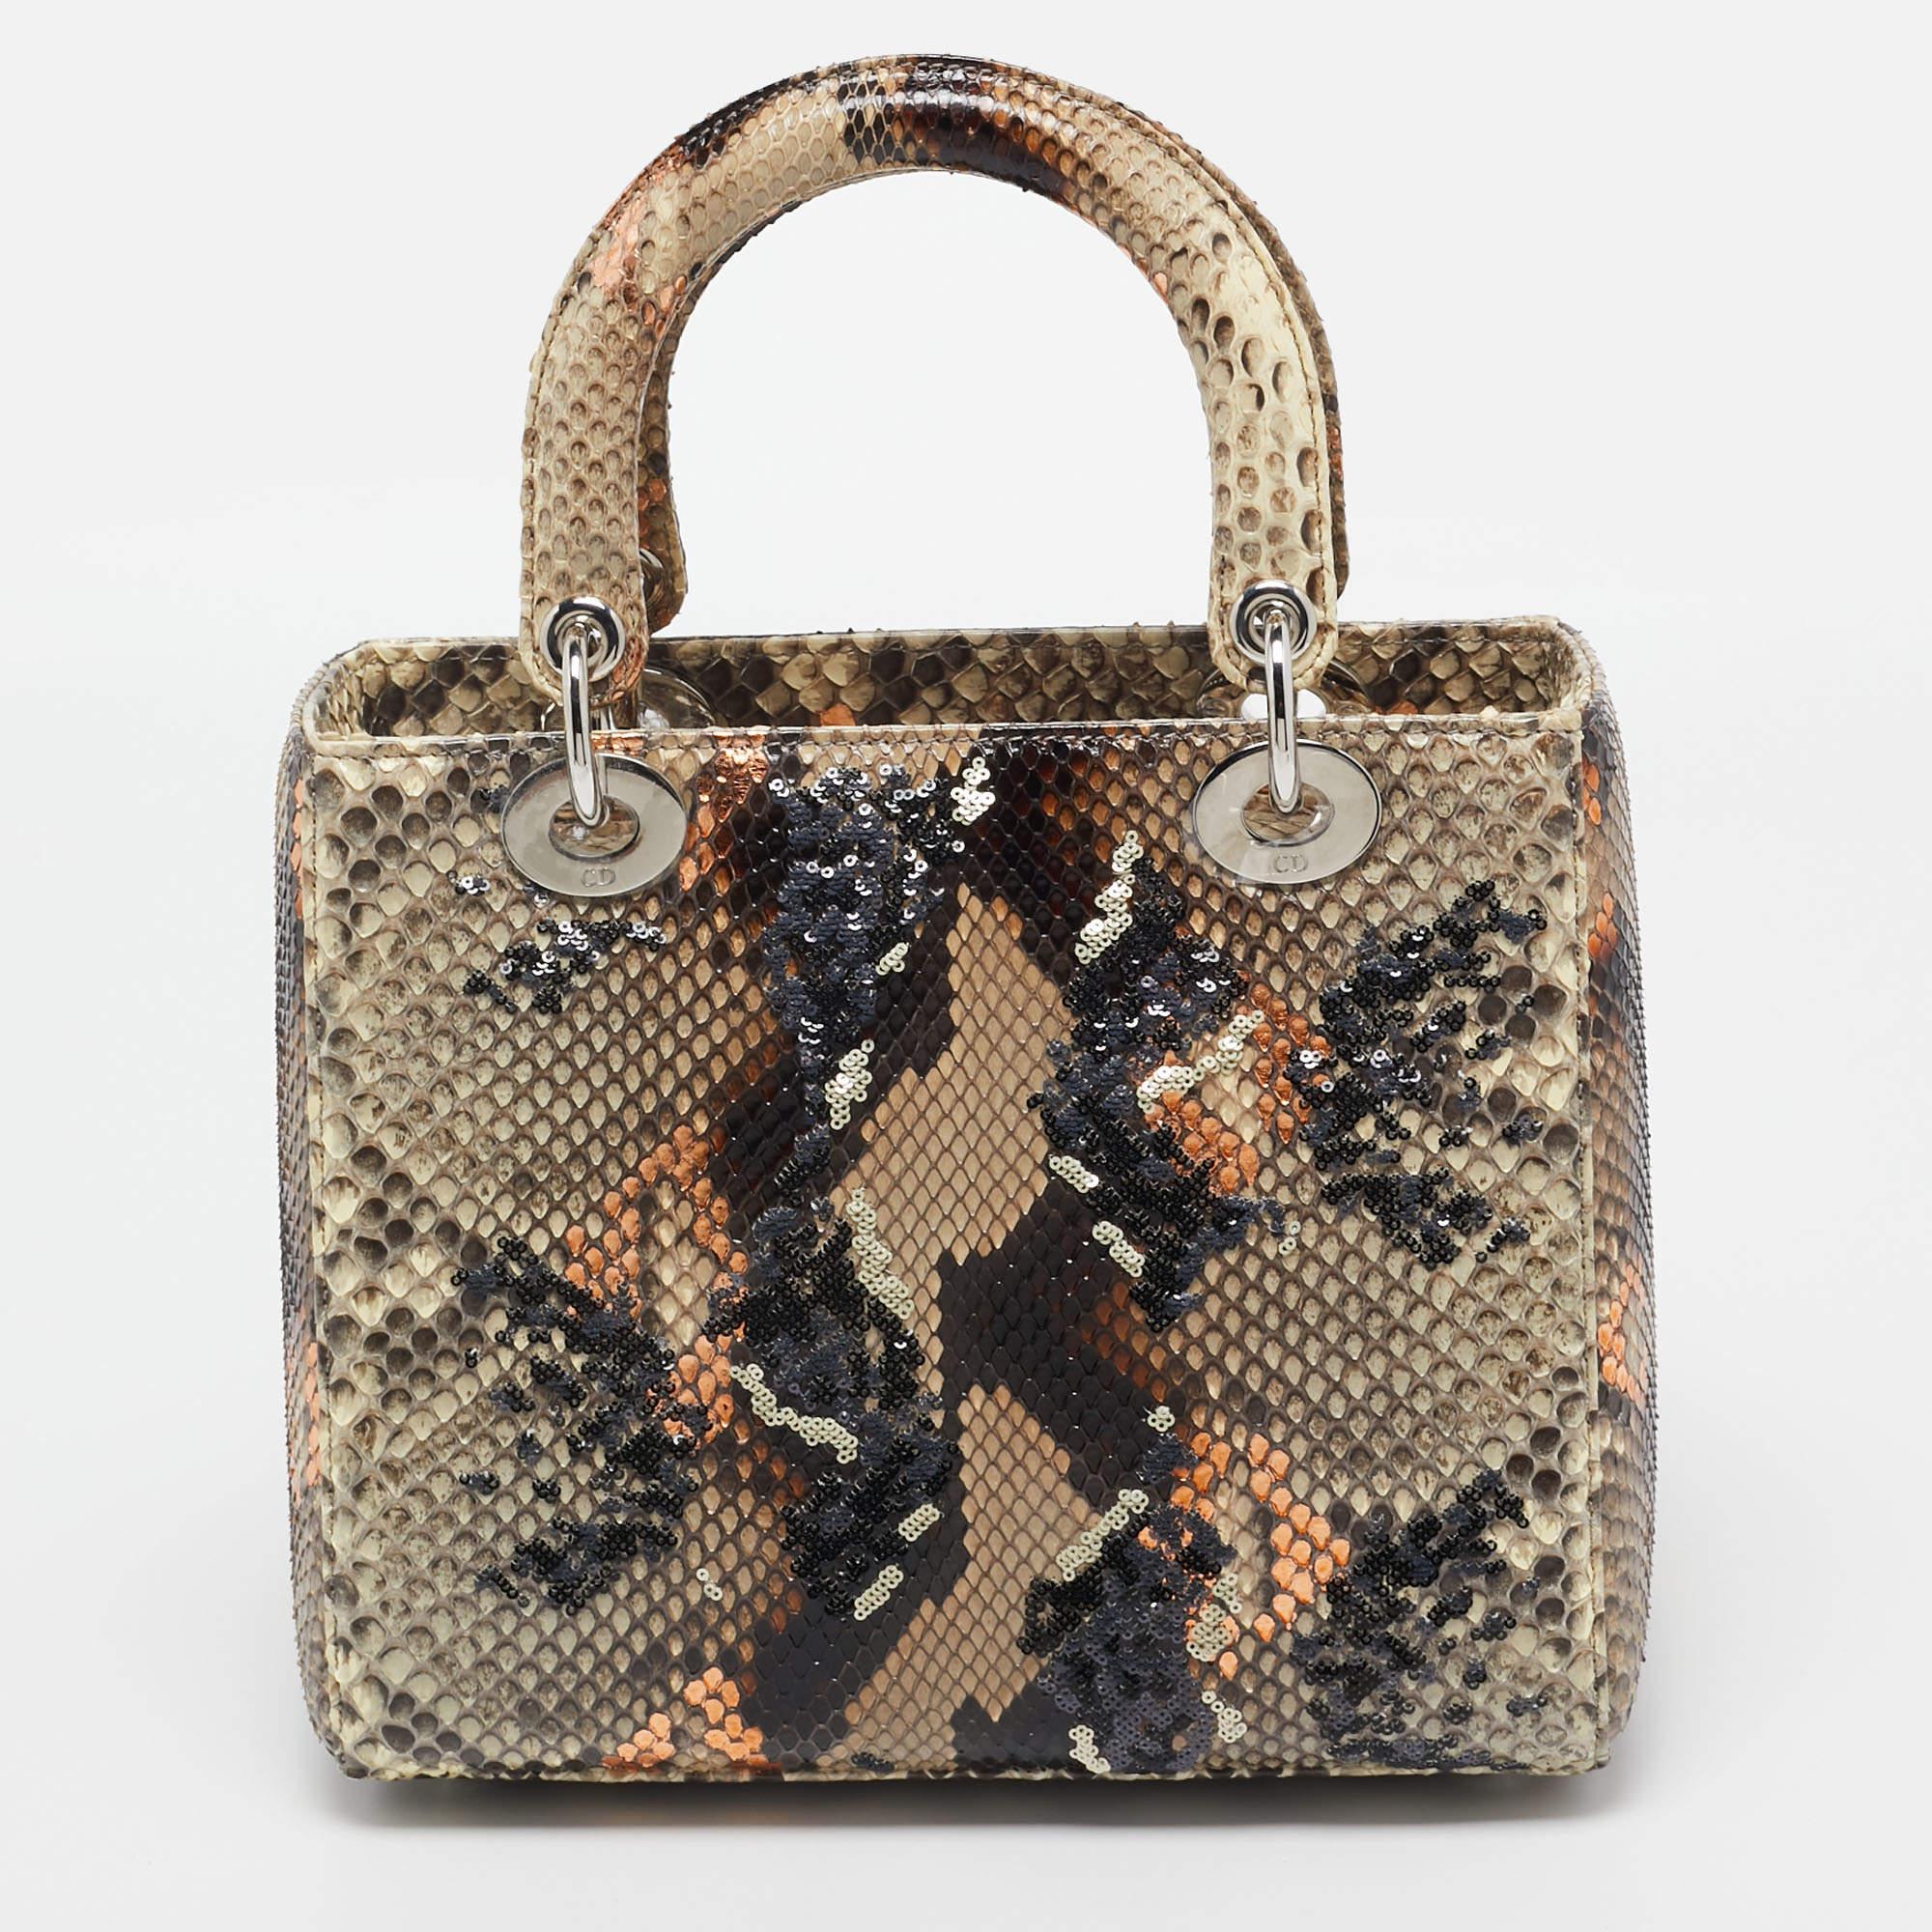 The Dior Lady Dior tote is an exquisite blend of luxury and artistry. This medium-sized tote features a sophisticated beige base adorned with multicolored python leather and intricate sequin embellishments, showcasing Dior's iconic cannage pattern